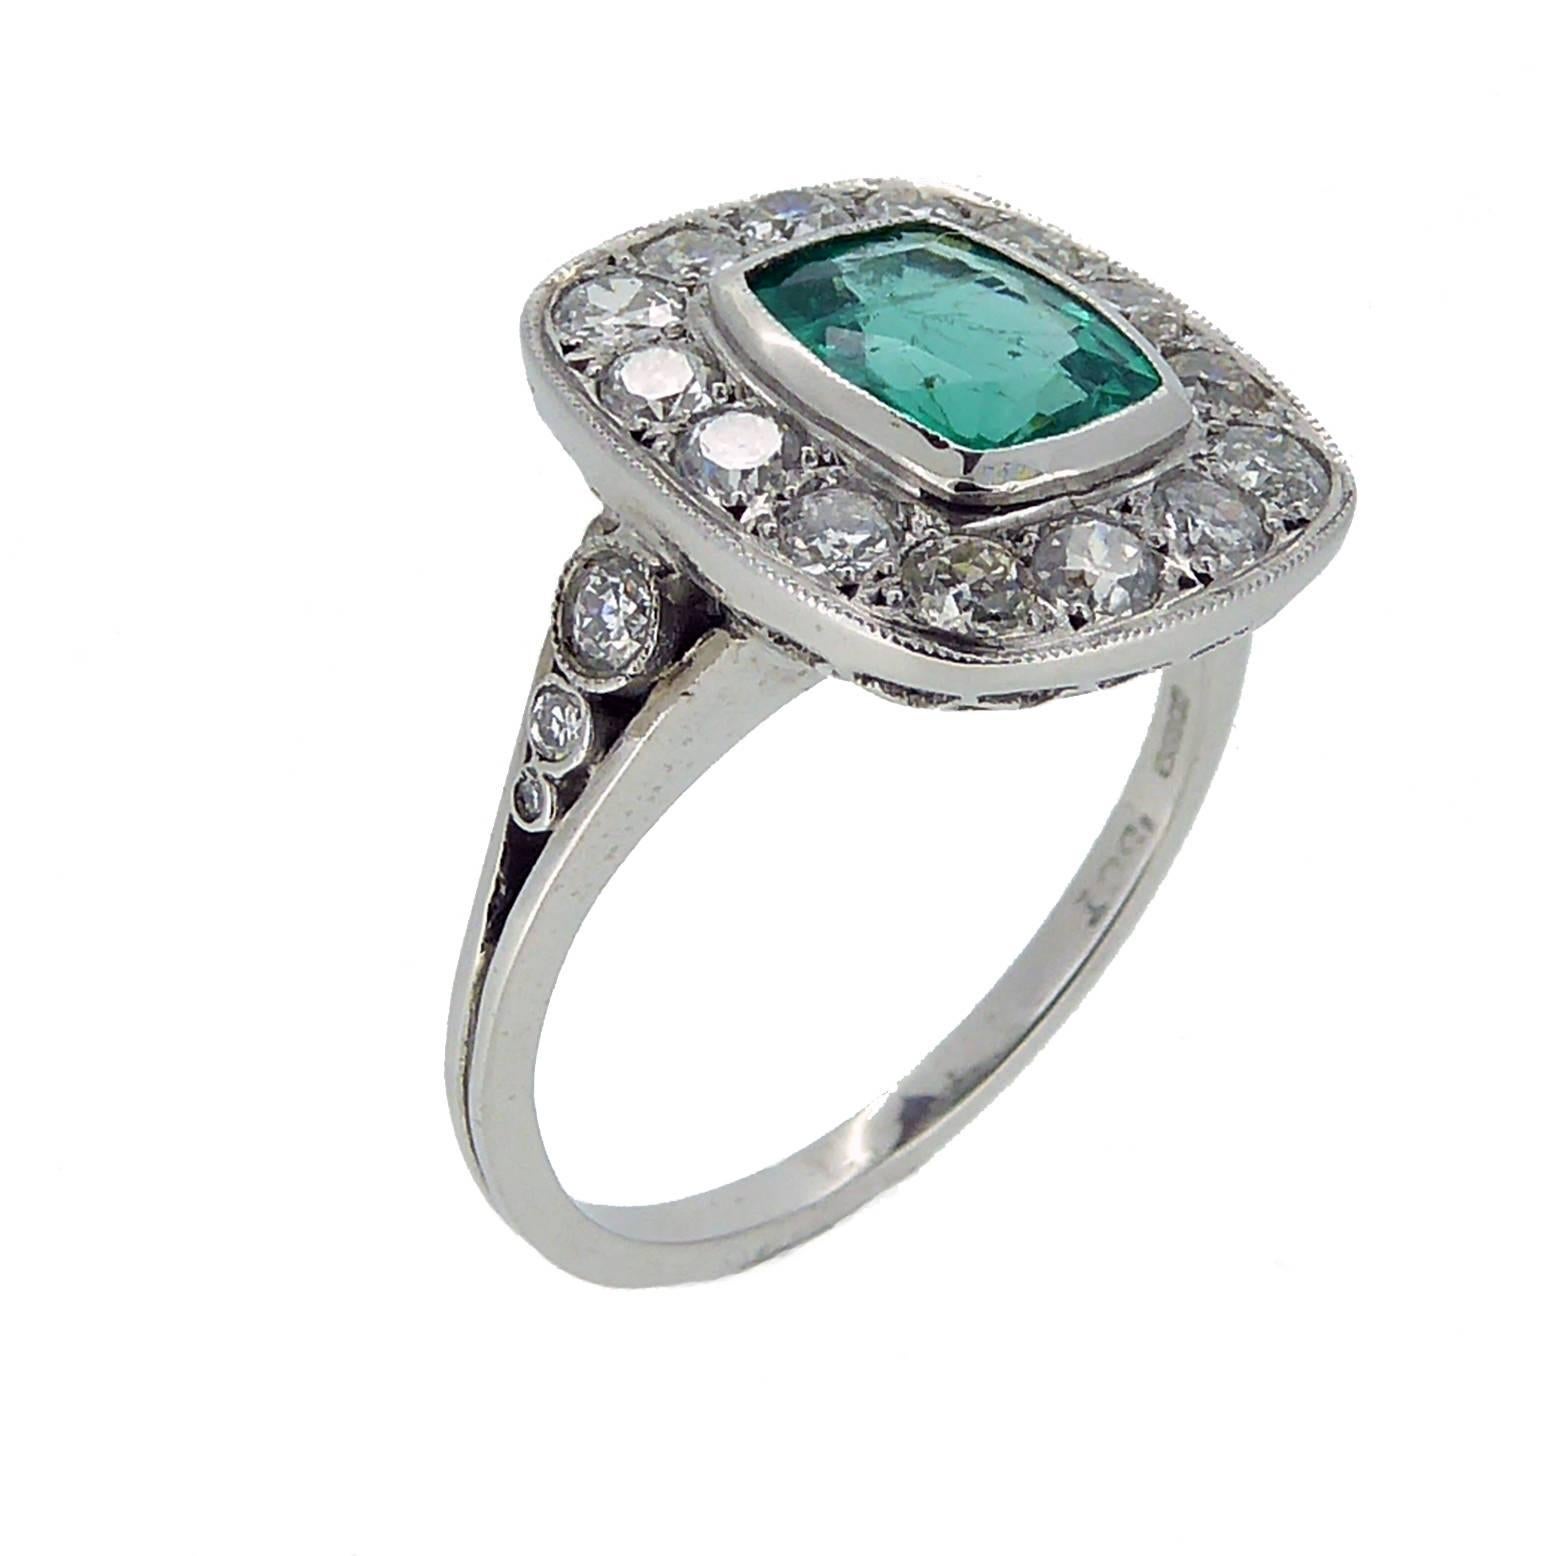 Art Deco Style Emerald and Diamond Ring, 1.04 Carat Emerald, Pre-Owned 1